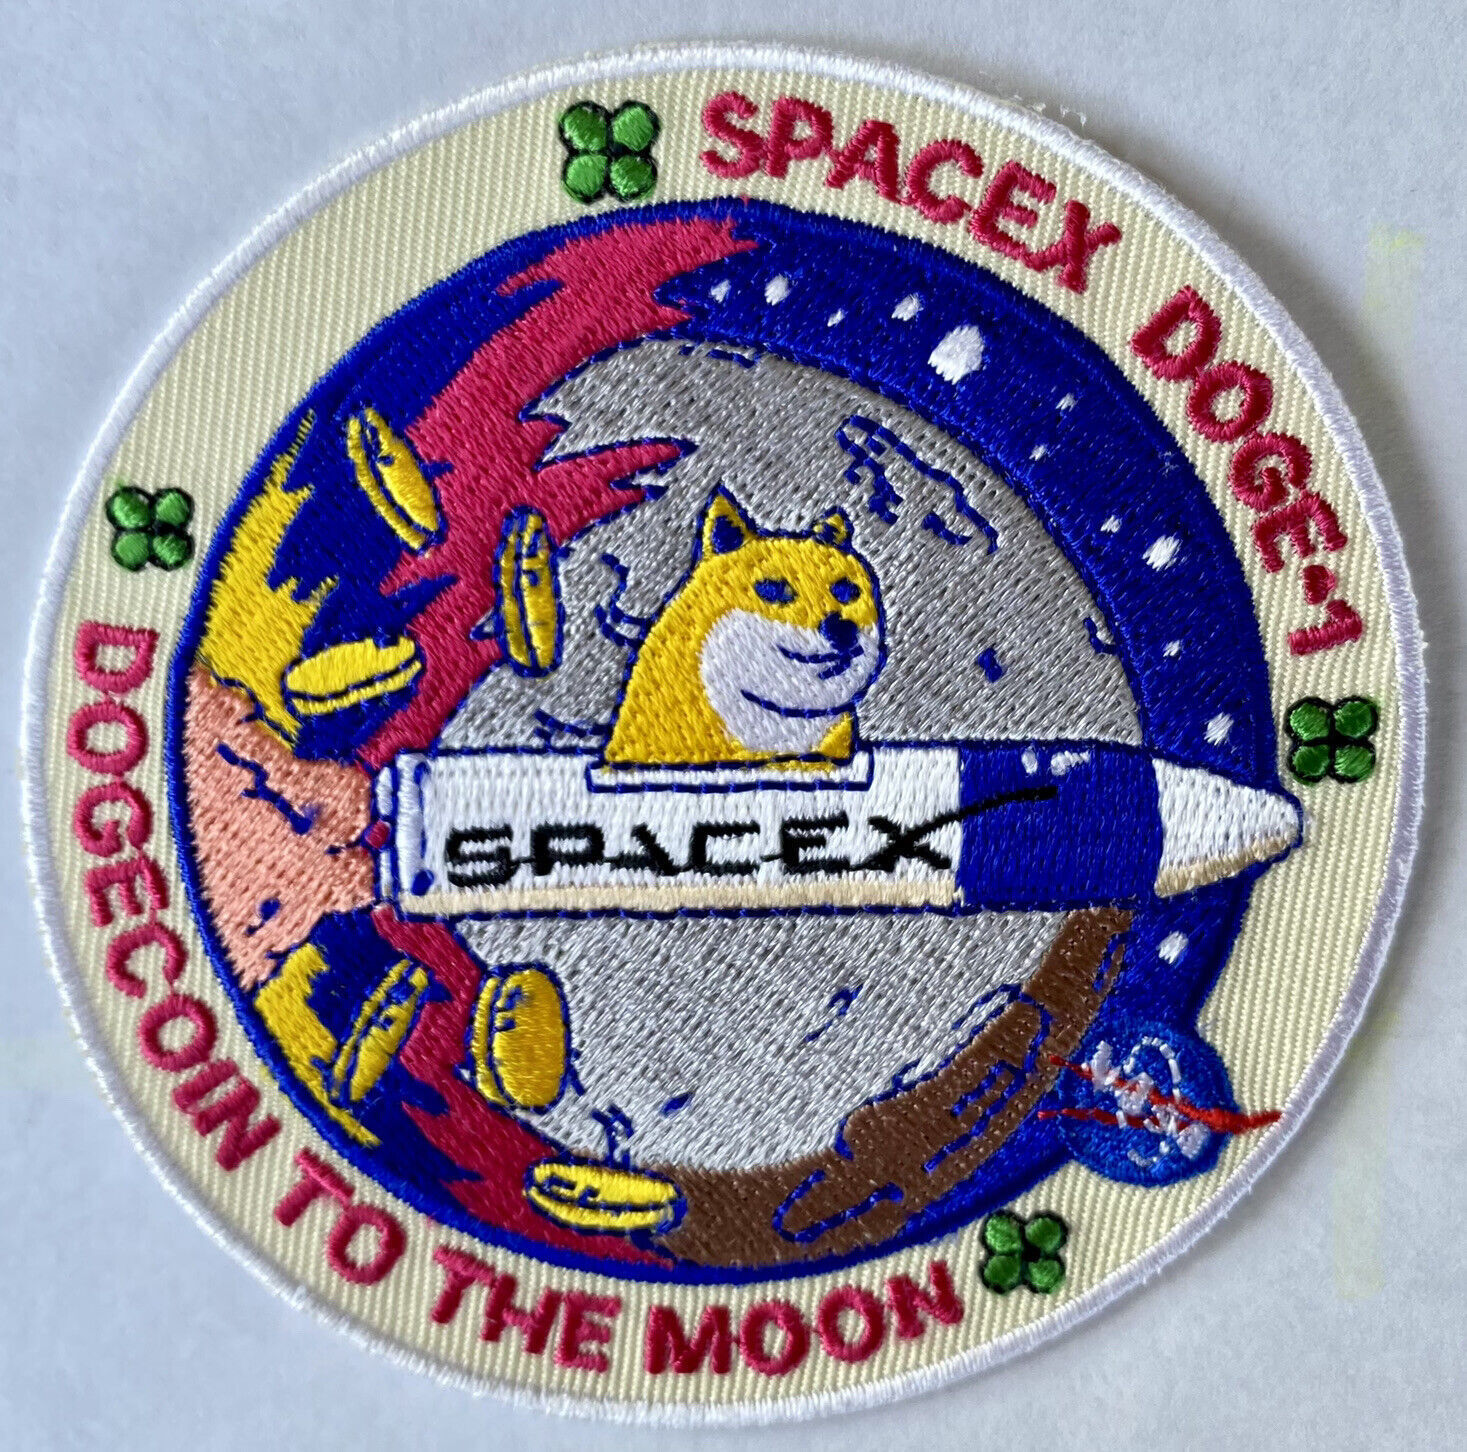 ORIGINAL SPACEX DOGE-1 To The Moon Mission Patch 3.5” NASA F9 ISS ELON MUSK